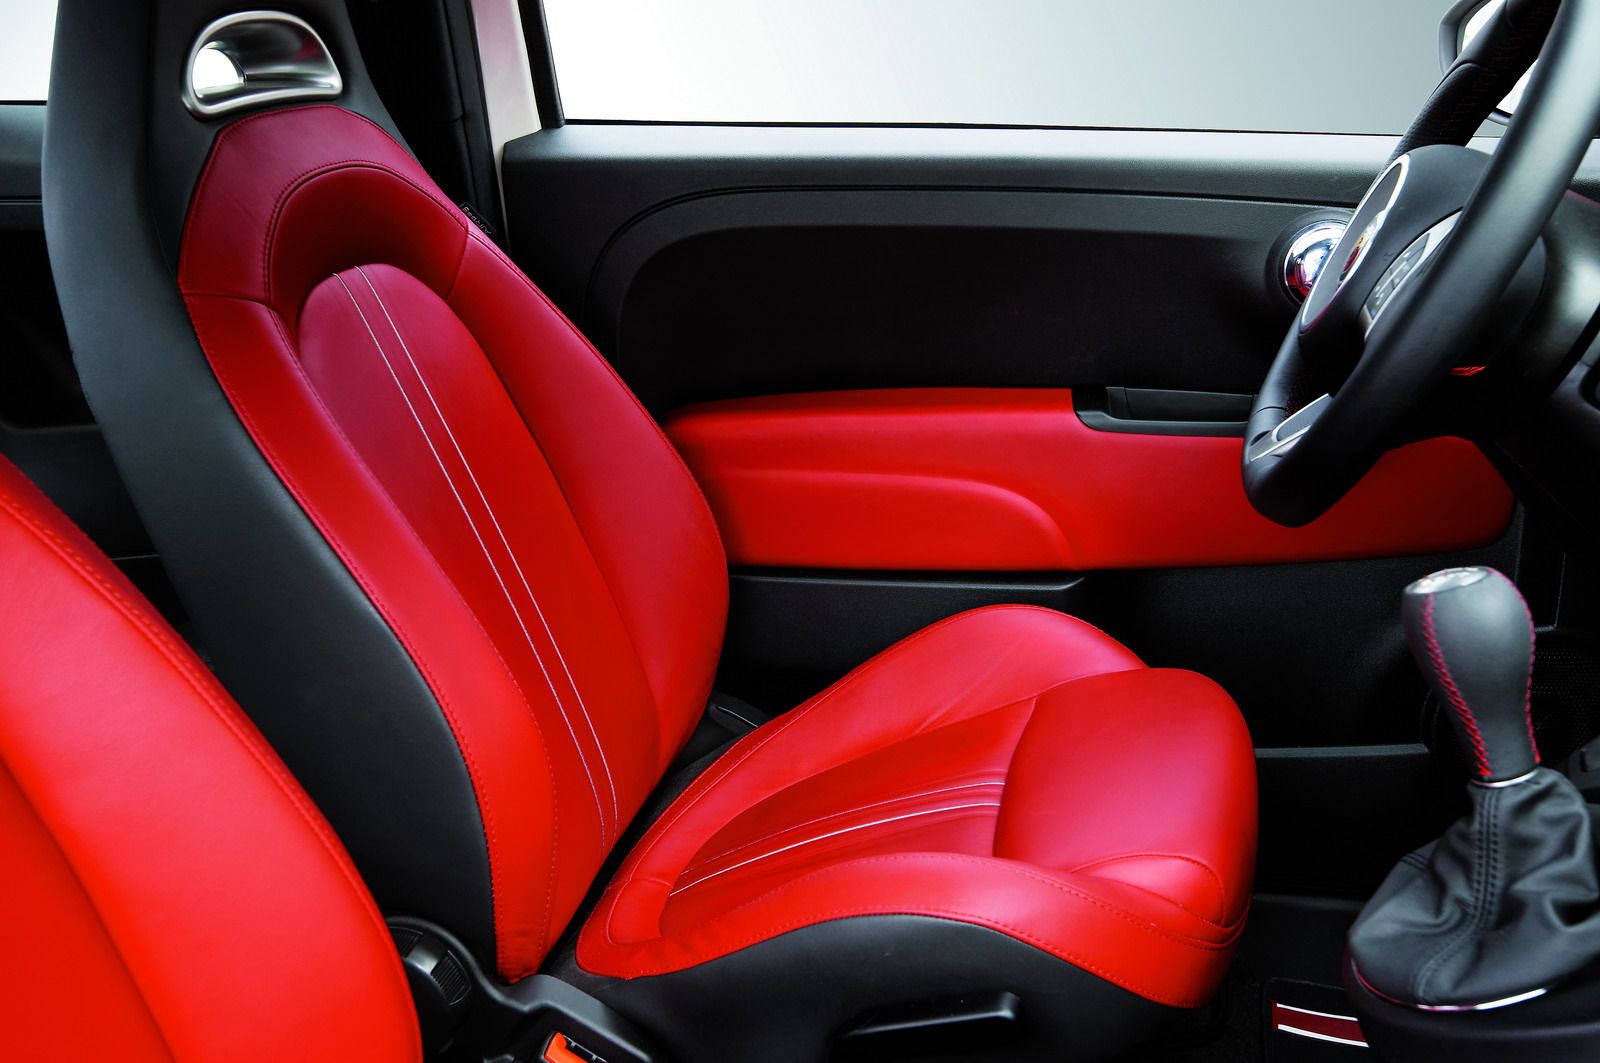 2008 Fiat 500 Abarth Opening Edition